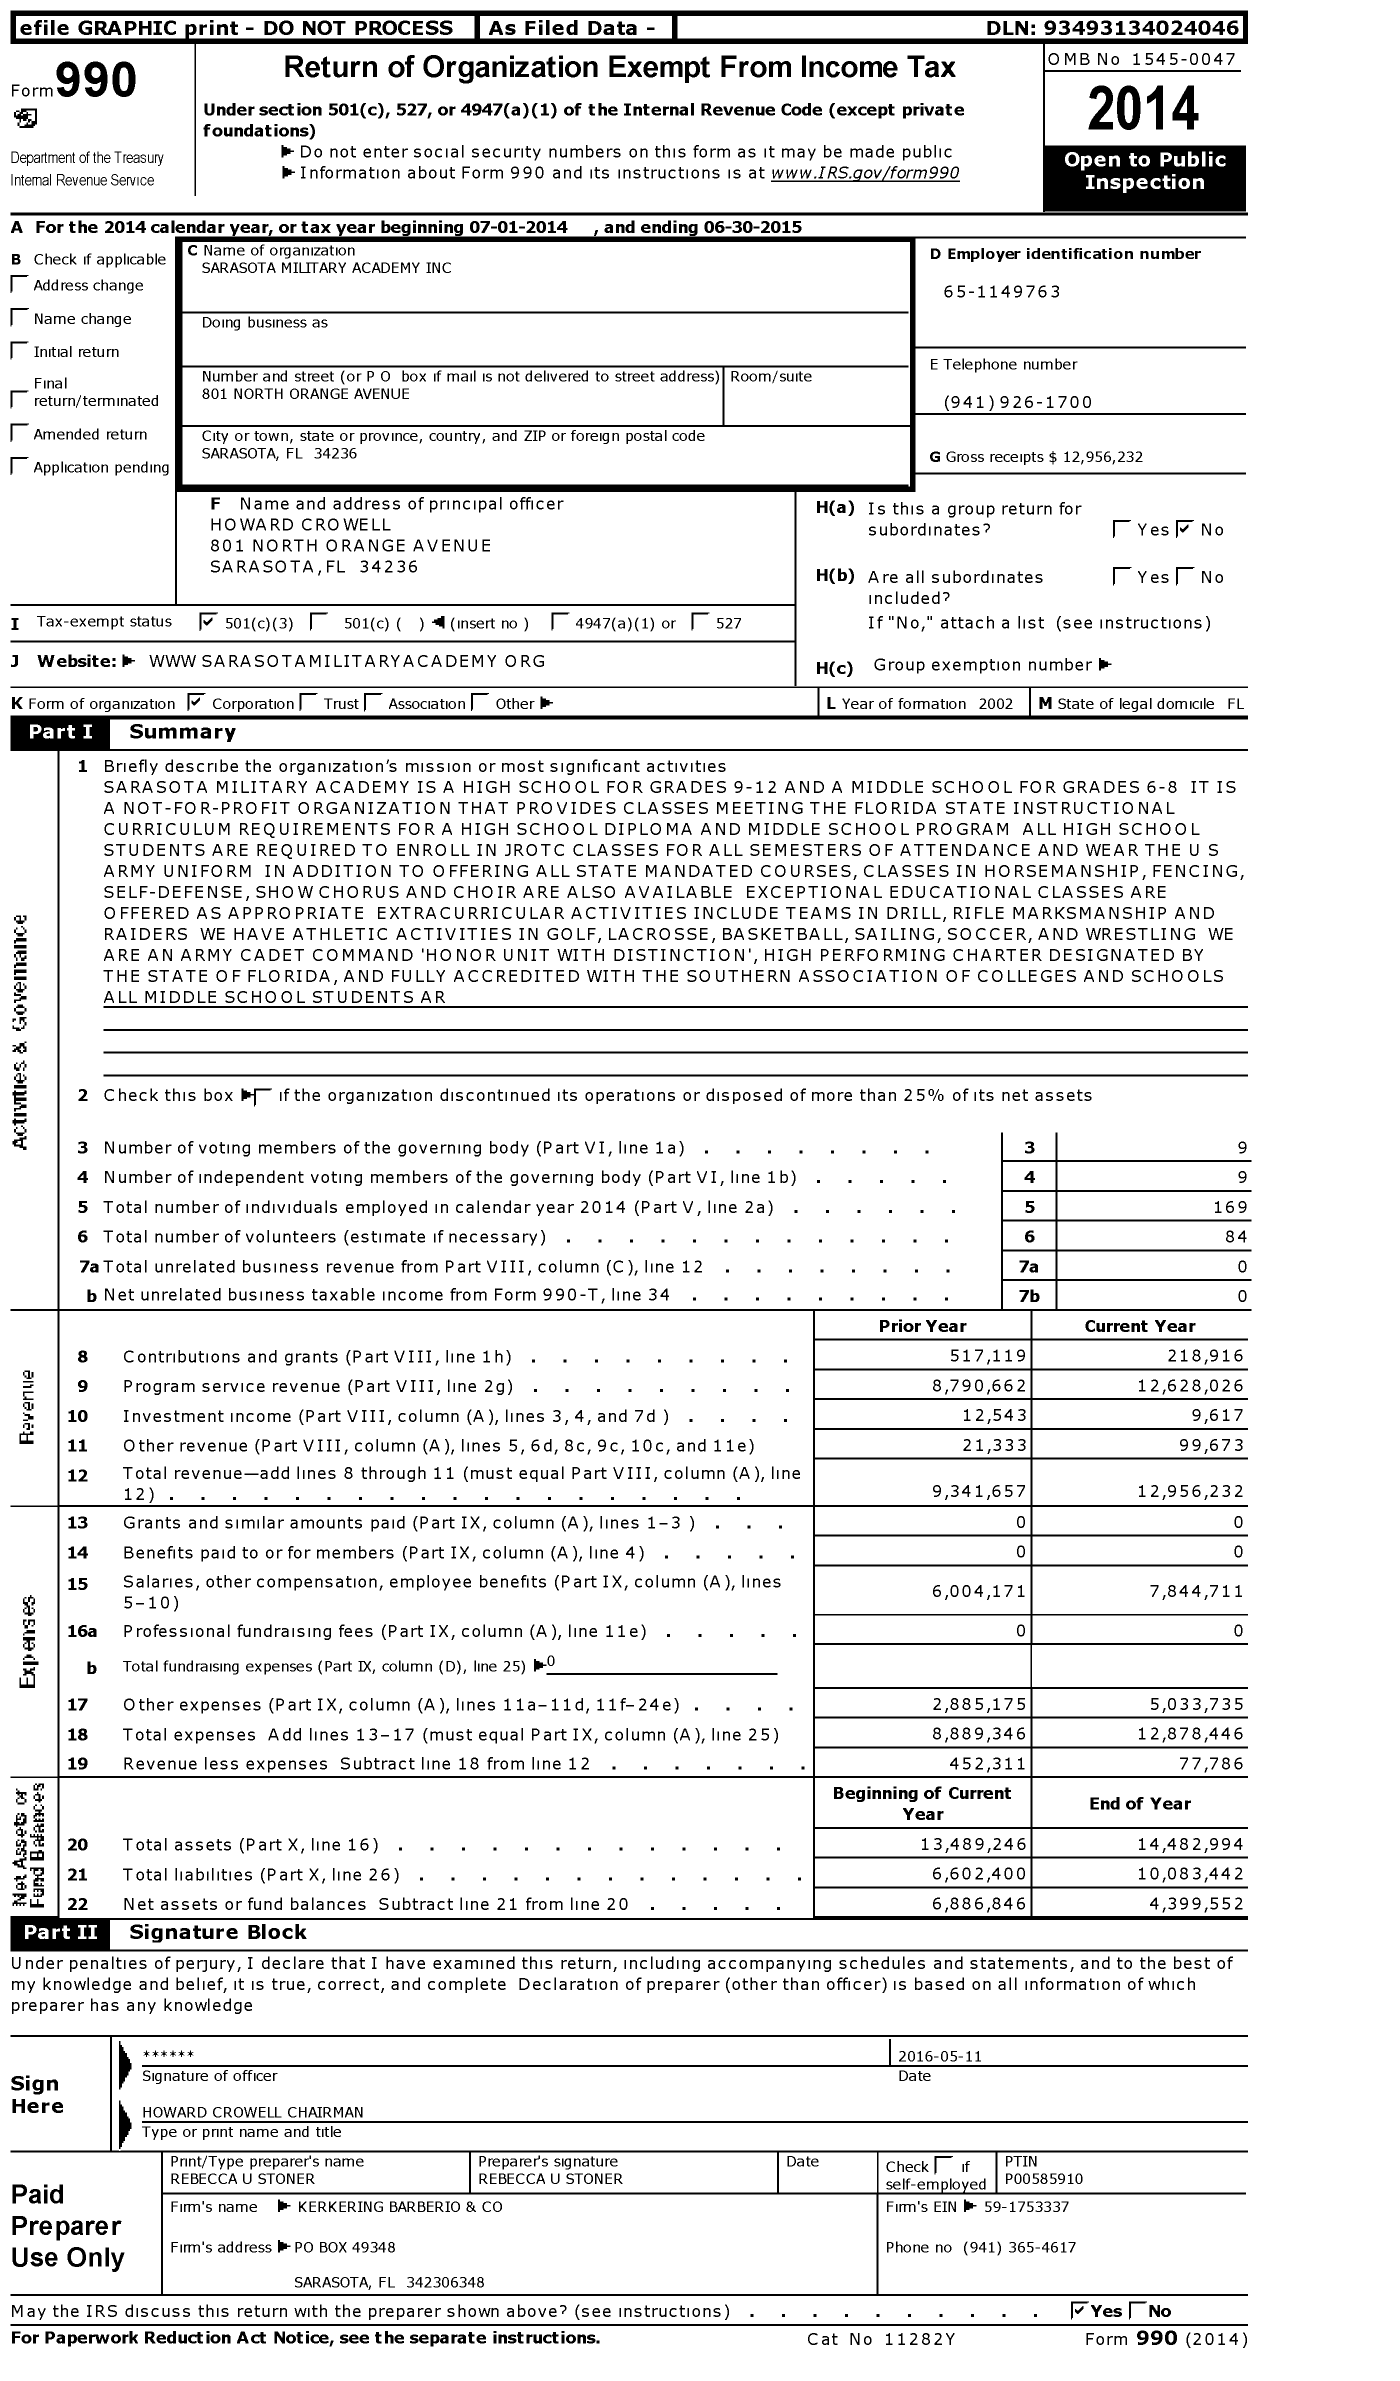 Image of first page of 2014 Form 990 for Sarasota Military Academy (SMA)